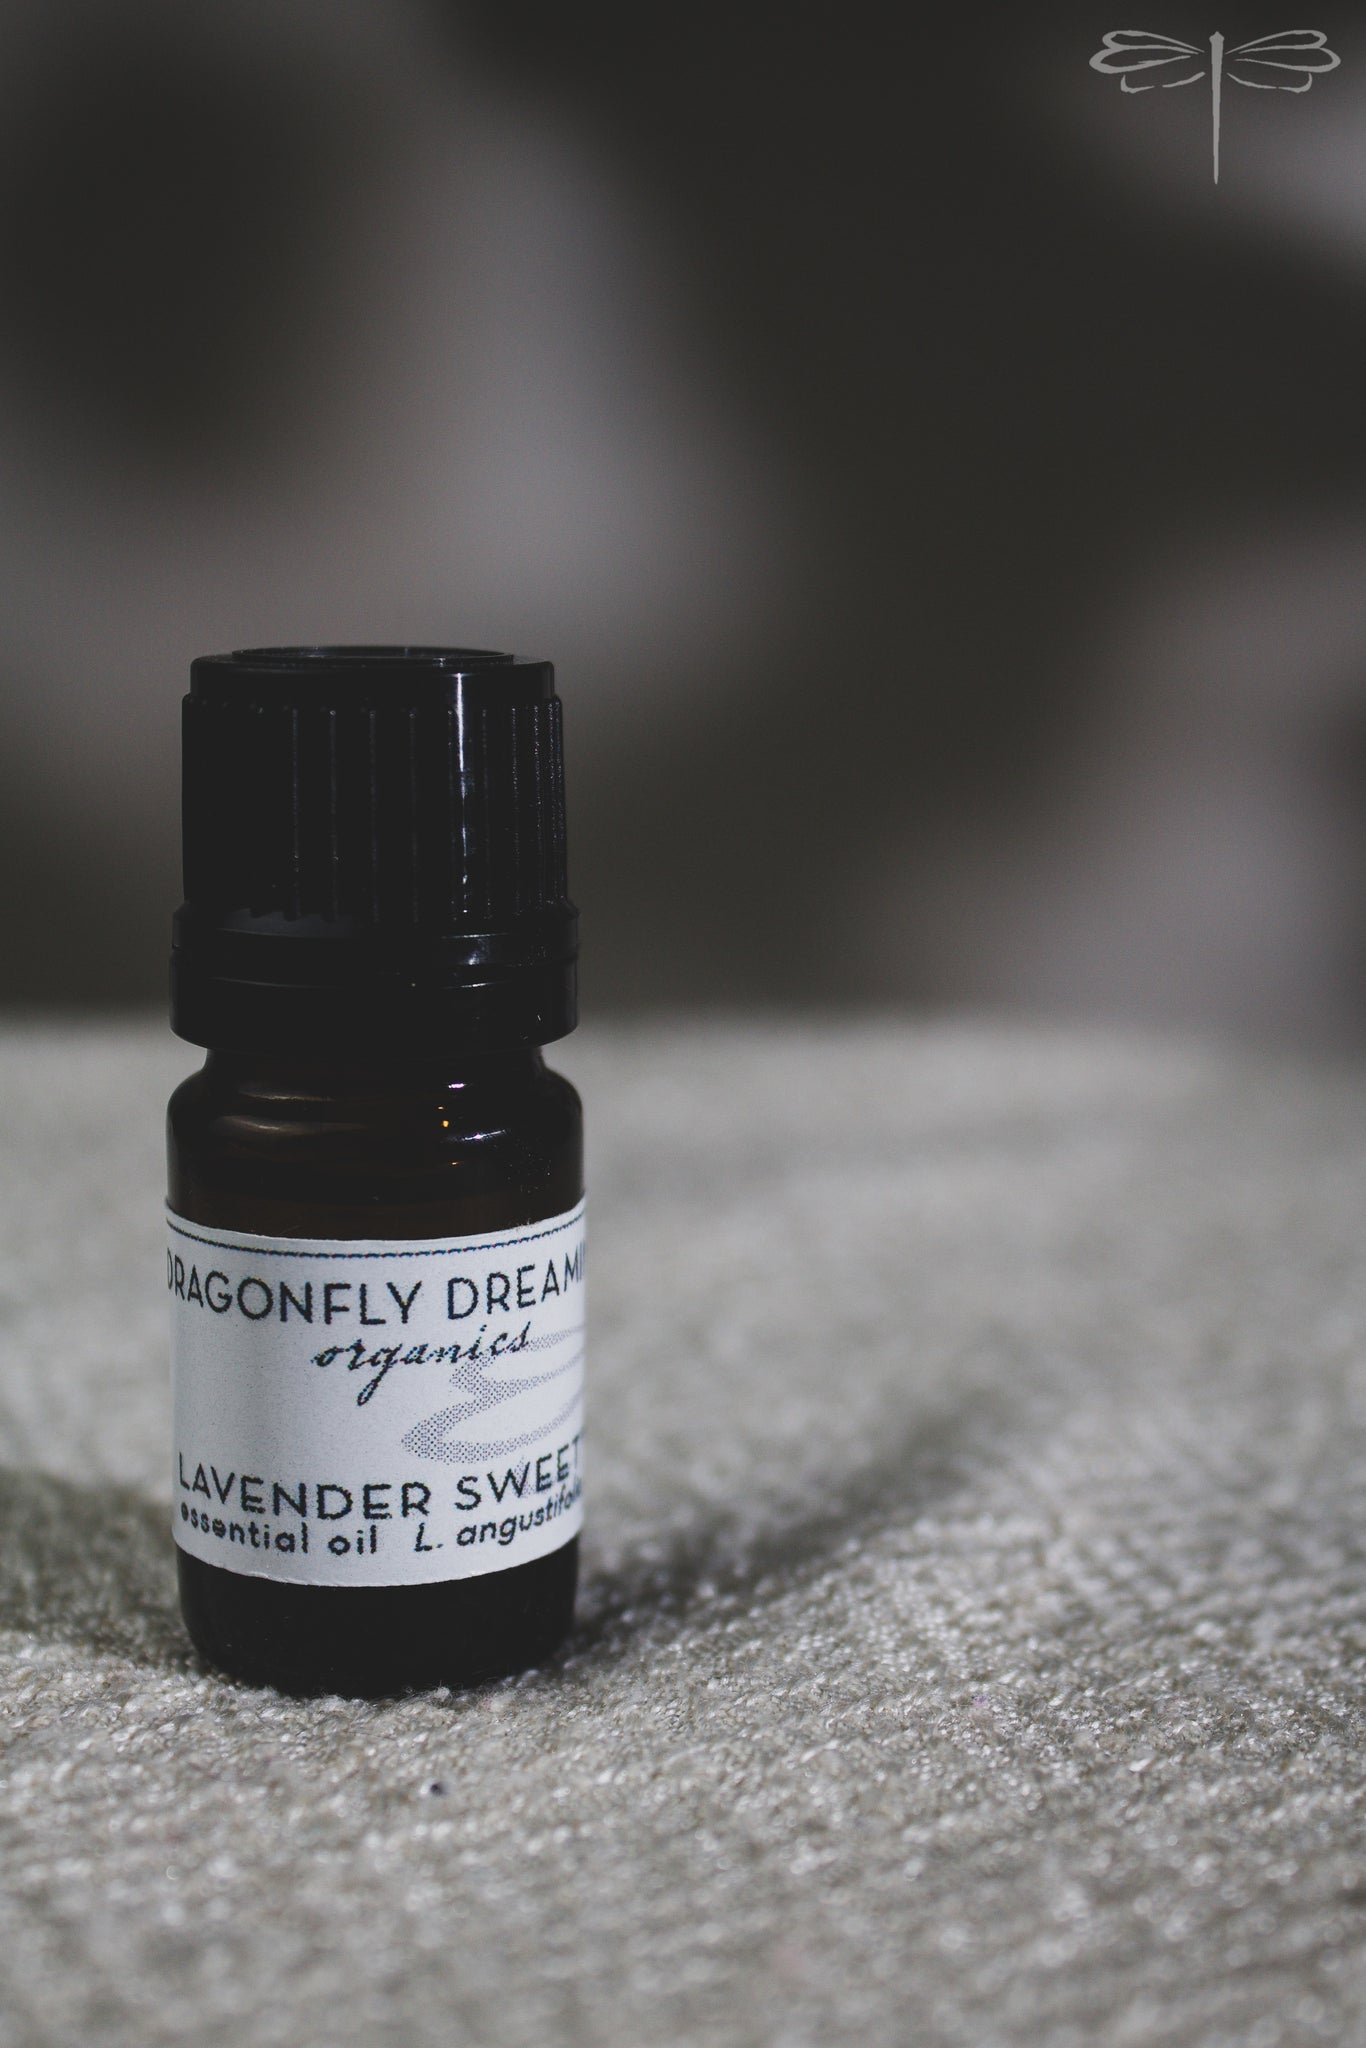 Lavender Essential Oil (Sweet) by Dragonfly Dreaming Organics